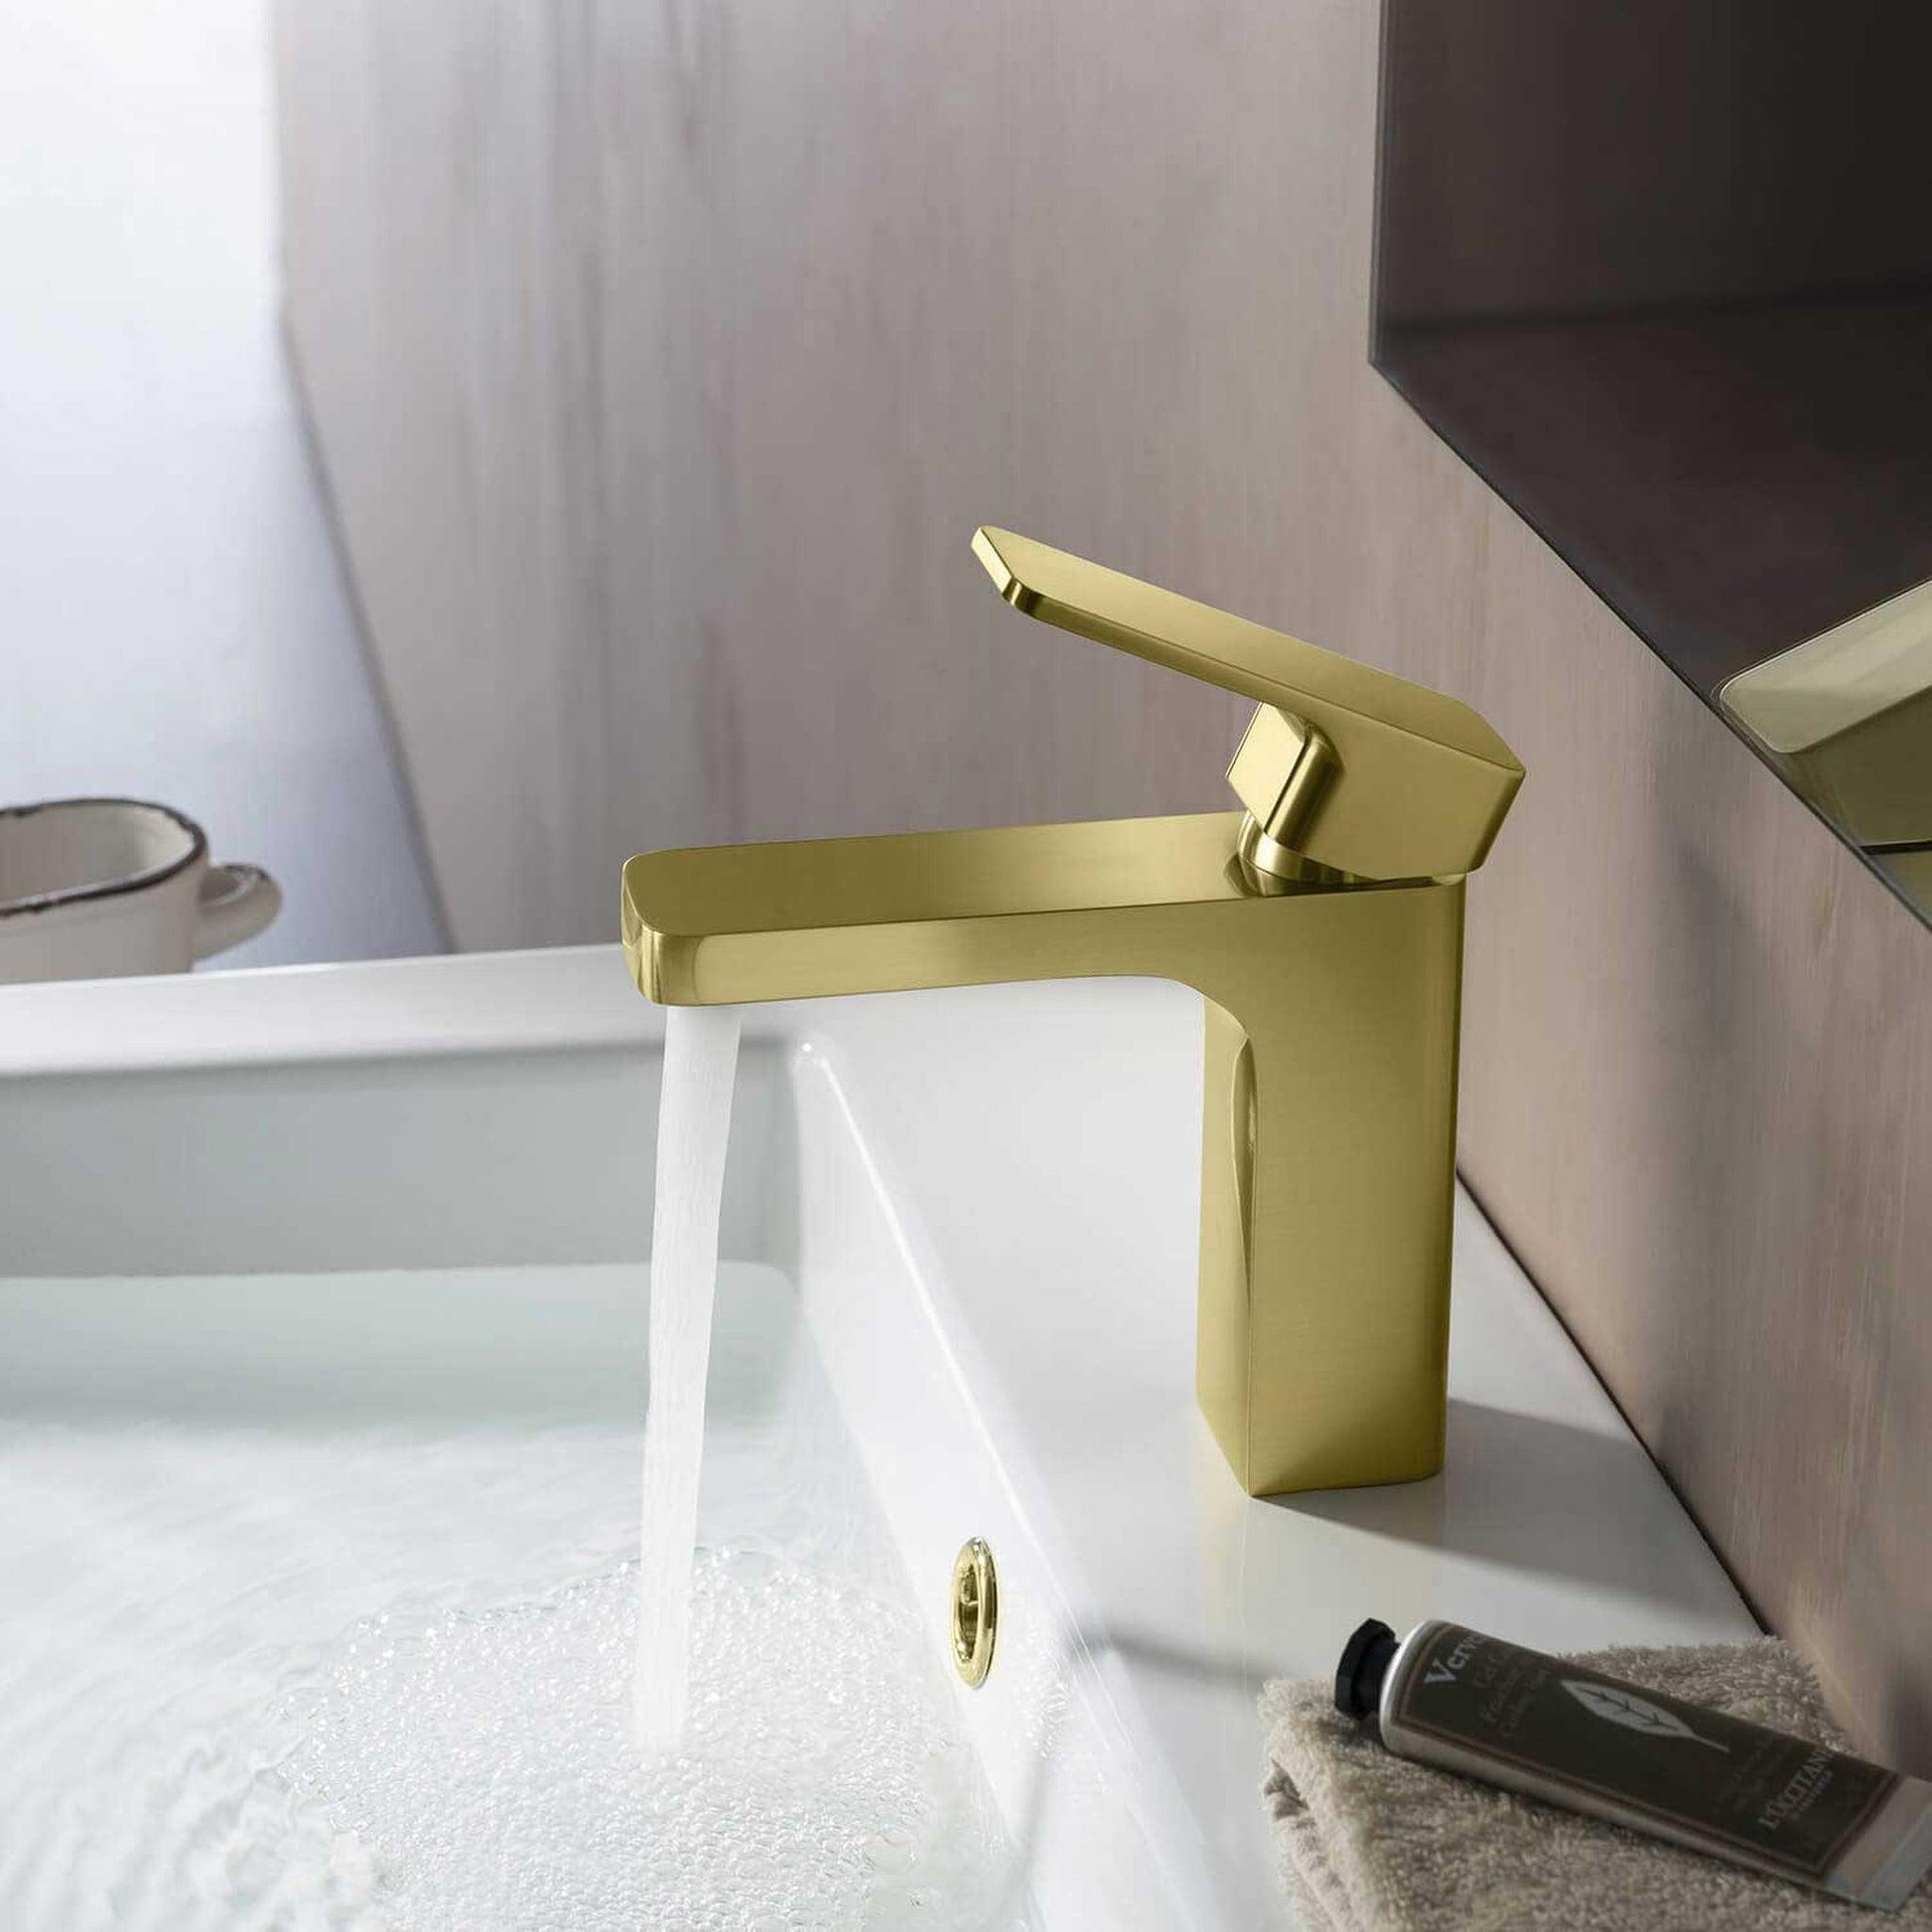 How to Clean Polished Brass Bathroom Faucets? - KIBI USA